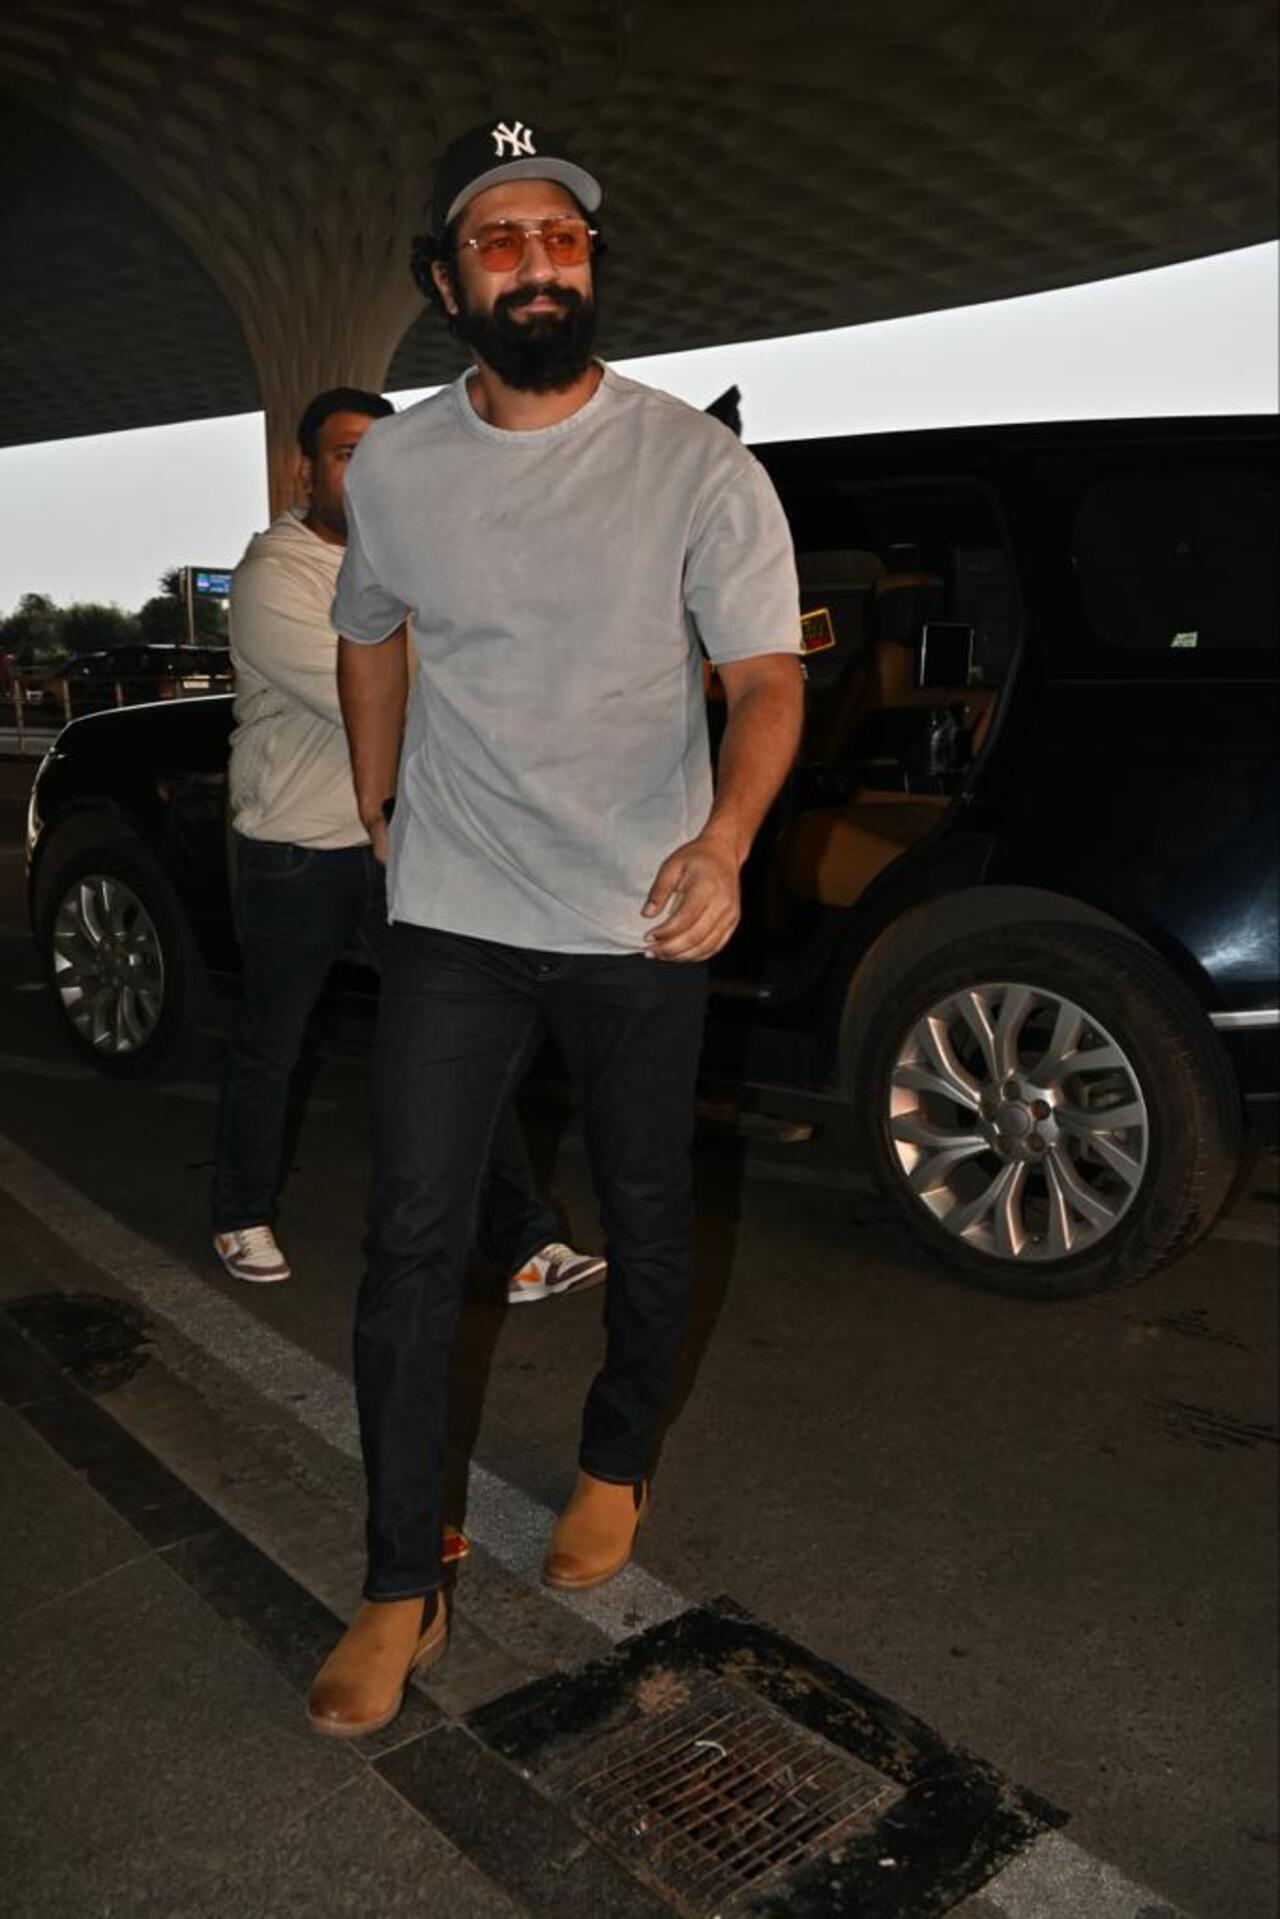 Vicky Kaushal jetted off to Amritsar to promote his upcoming film, Sam Bahadur